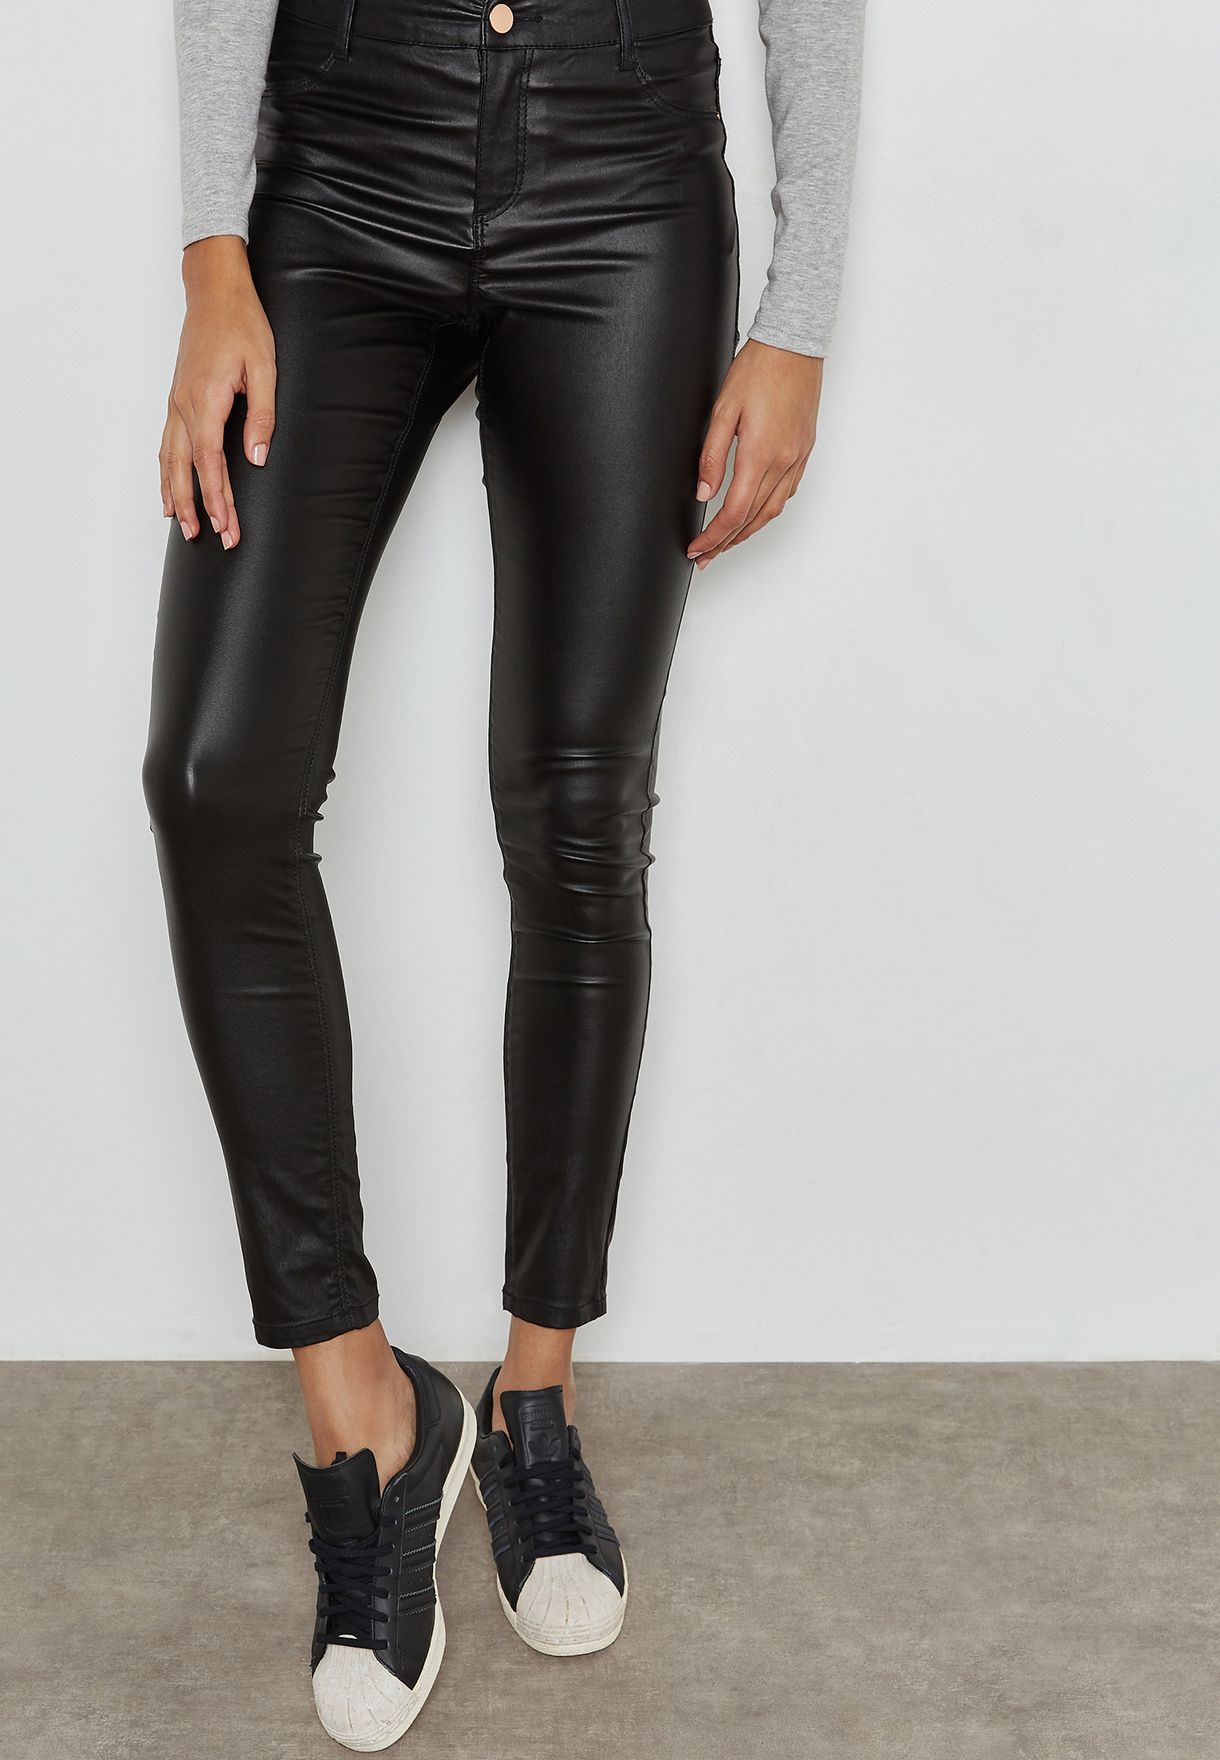 dorothy perkins coated jeans